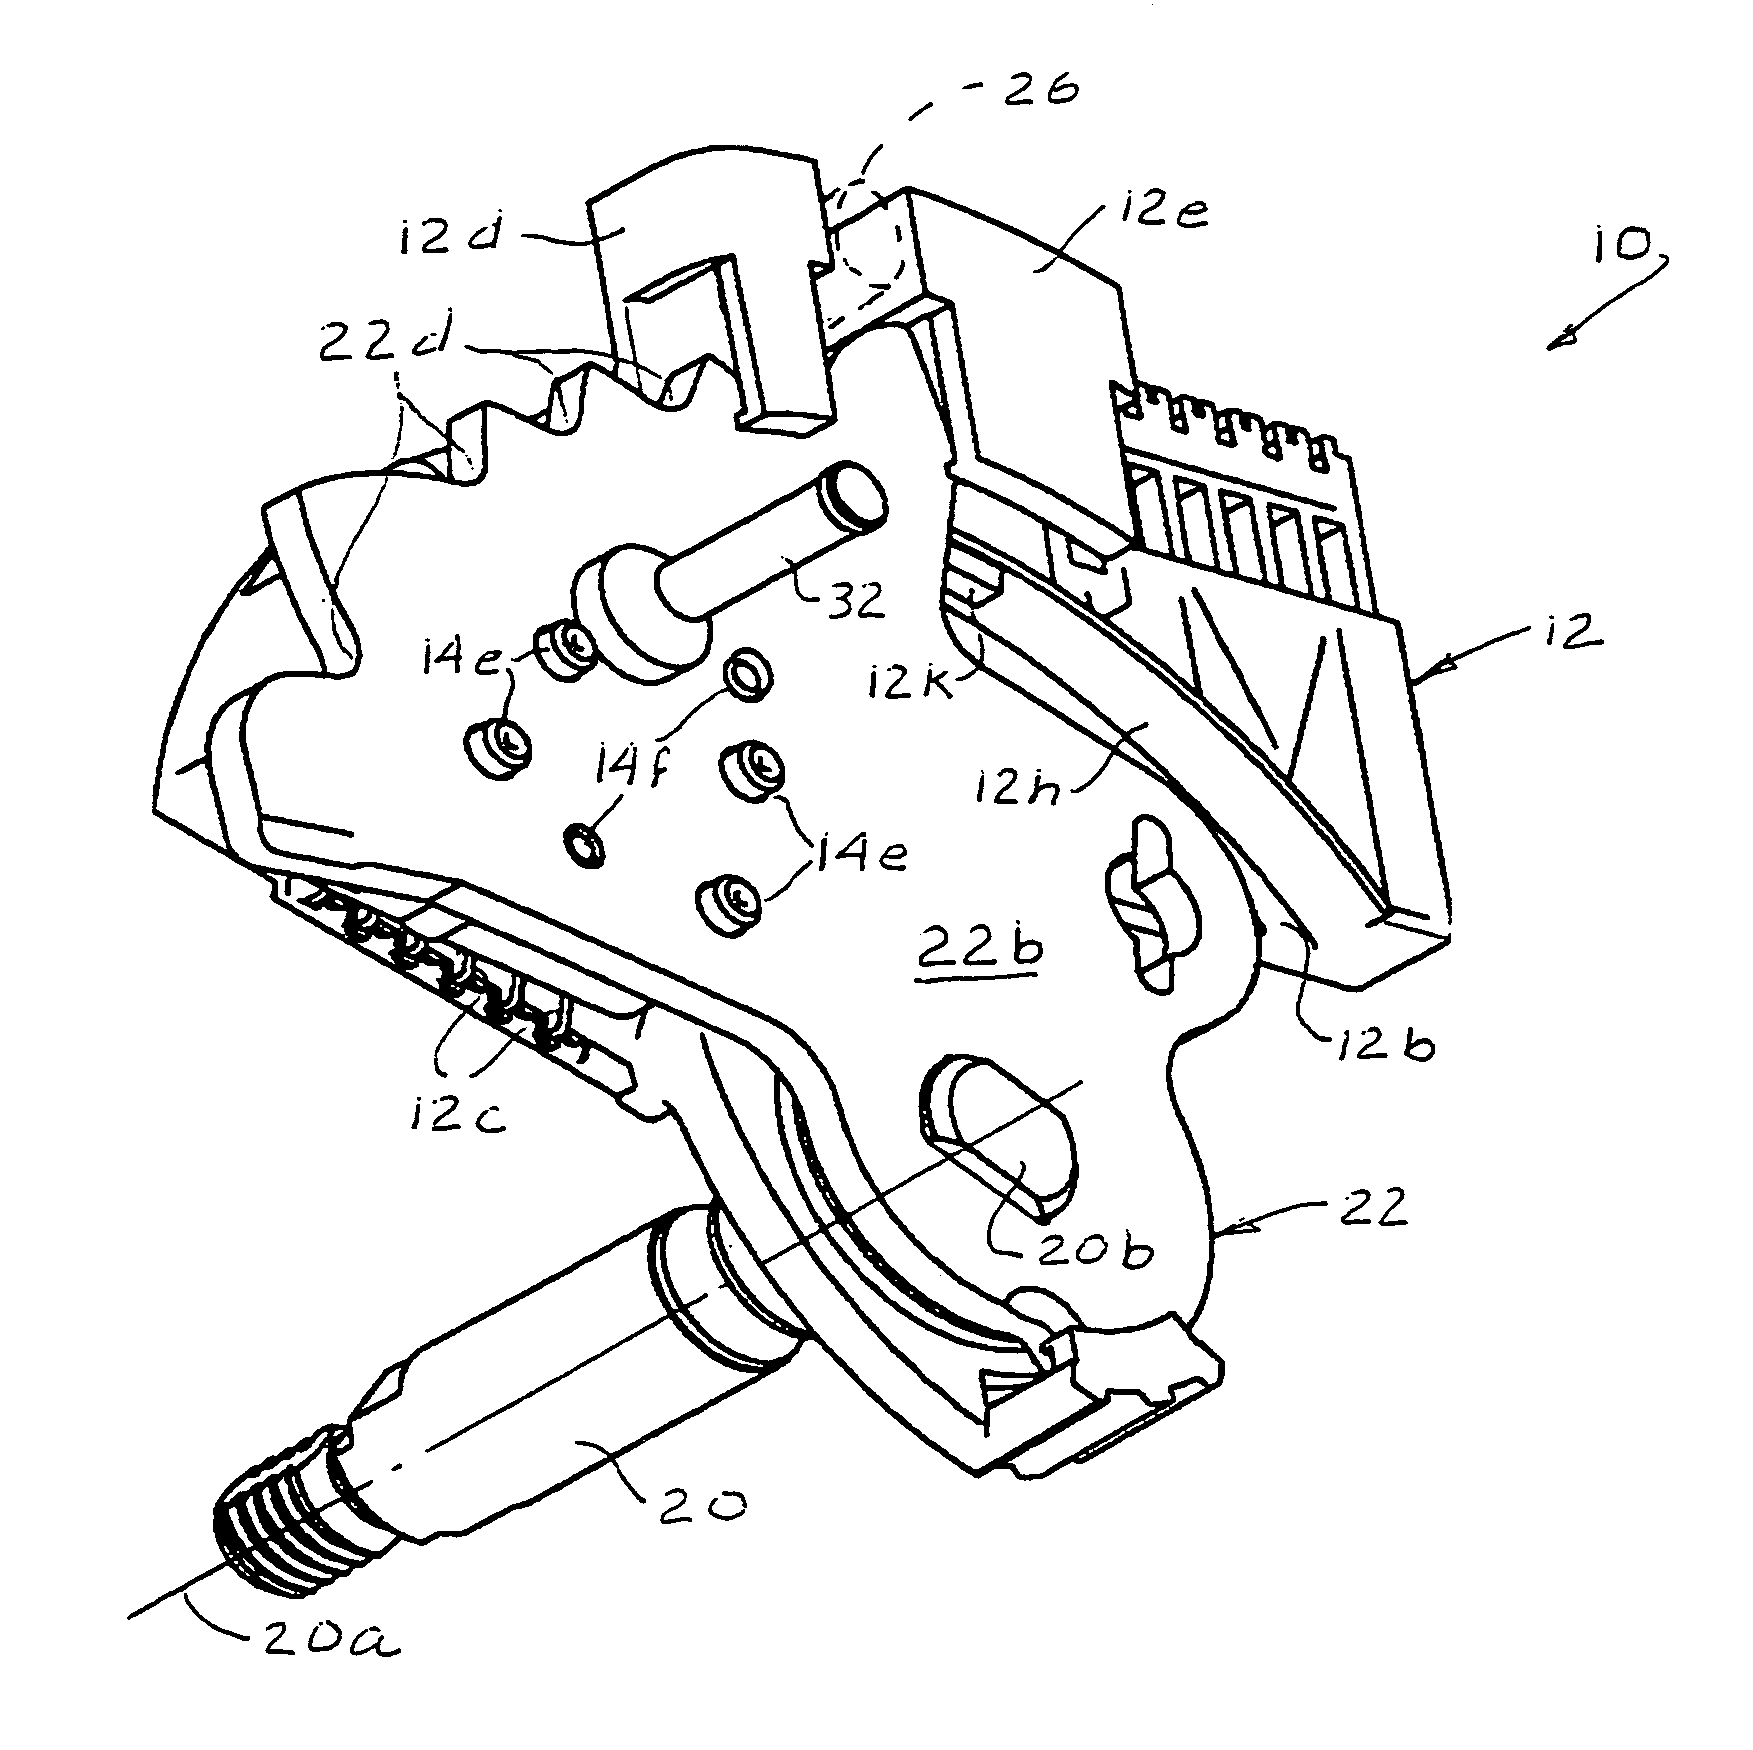 Electrical switch system responsive to gear selection of vehicular transmission